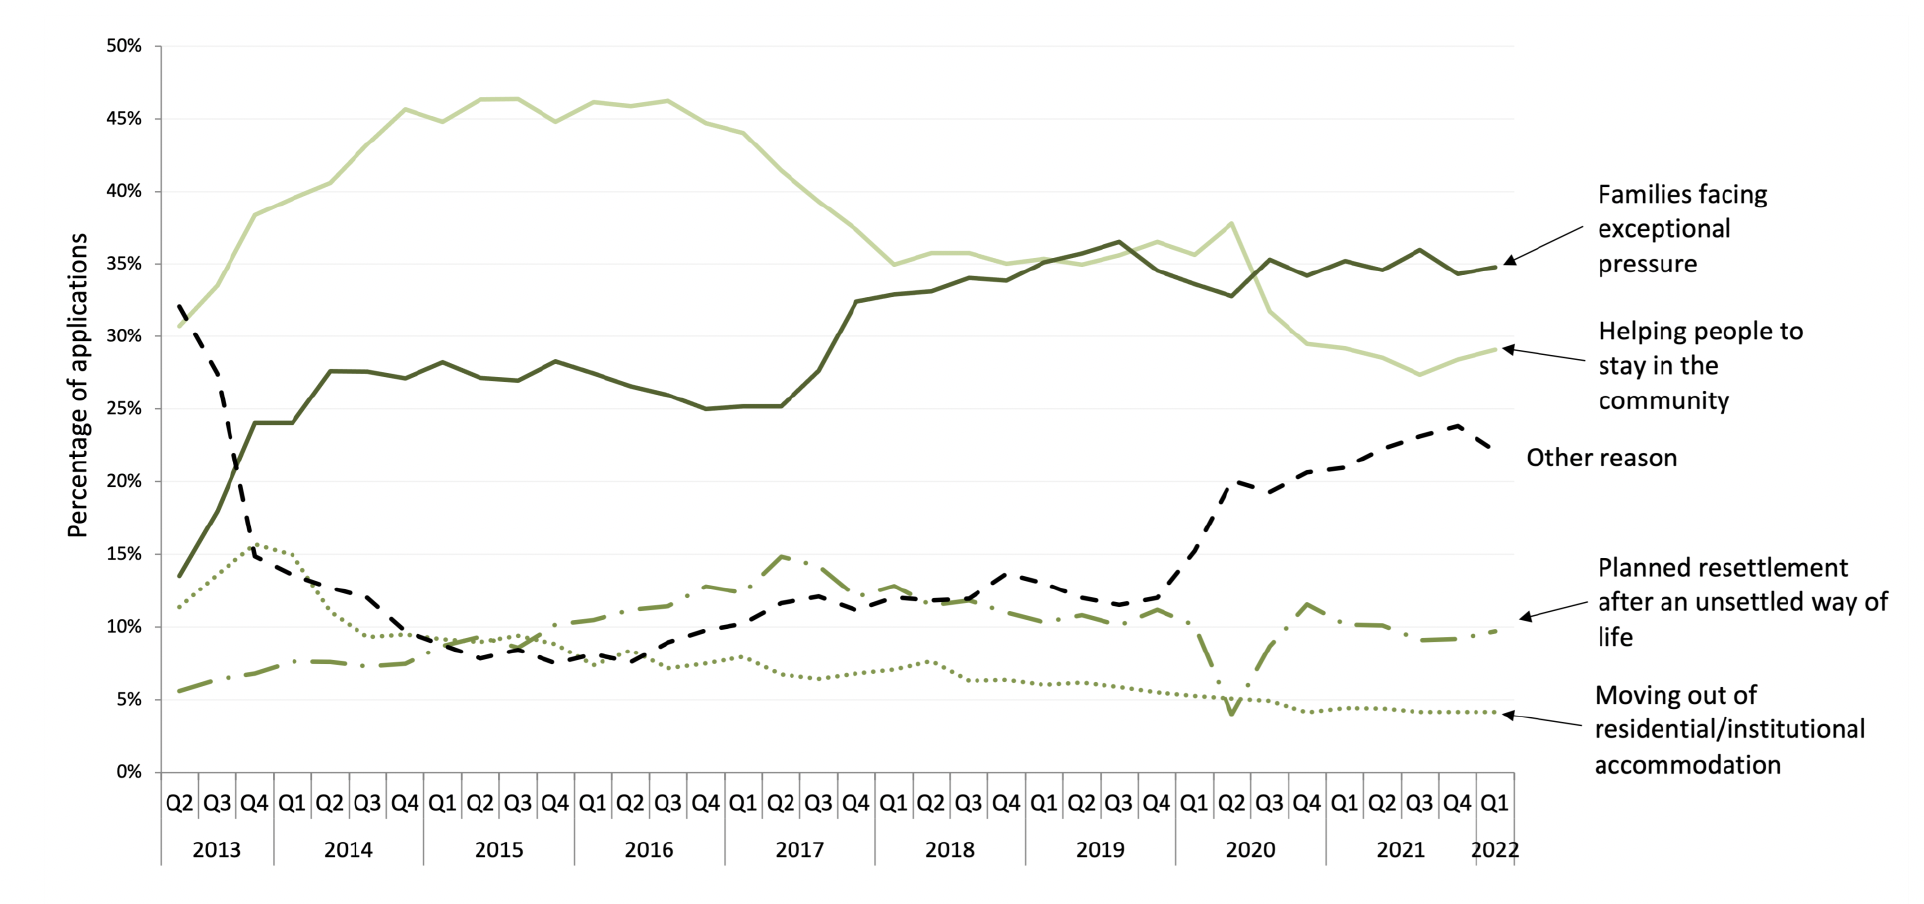 This figure shows a line chart of the percentage of CCG applications recorded with the following reasons for application: Families facing exceptional pressure, helping people to stay in the community, Planned resettlement after an unsettled way of life, Moving out of residential/institutional accomodation or other. The trends over time are shown from 2013 to 2022. The main trends are described in the text. 